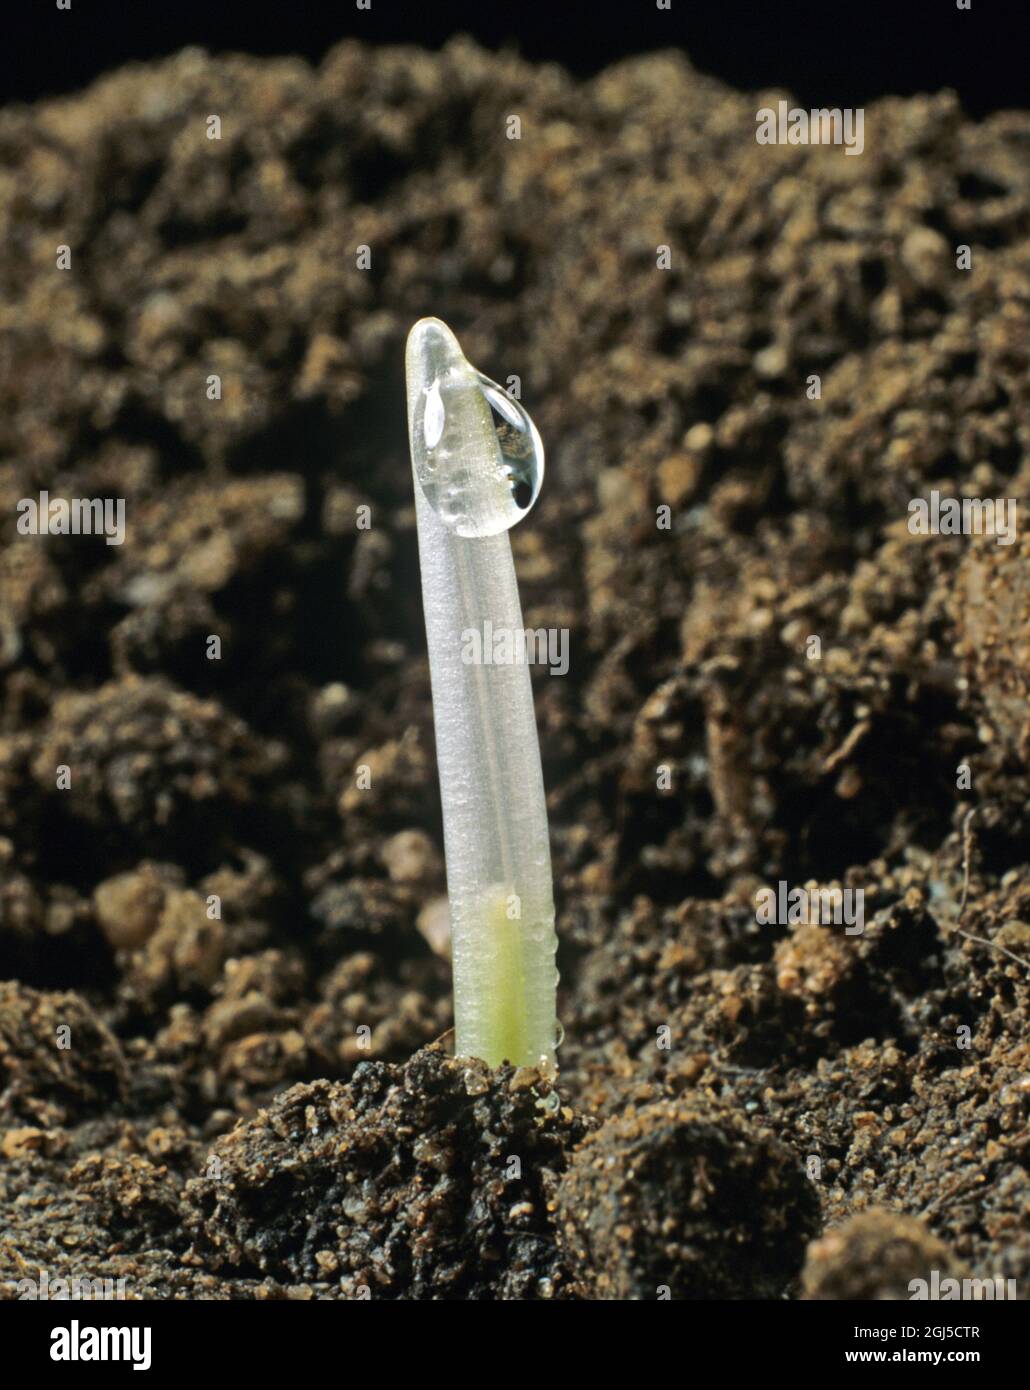 Barley seedling emerging from the soil after germination. Translucent coleoptile with exudation droplet wiuth the green of the first foliage leaf just Stock Photo